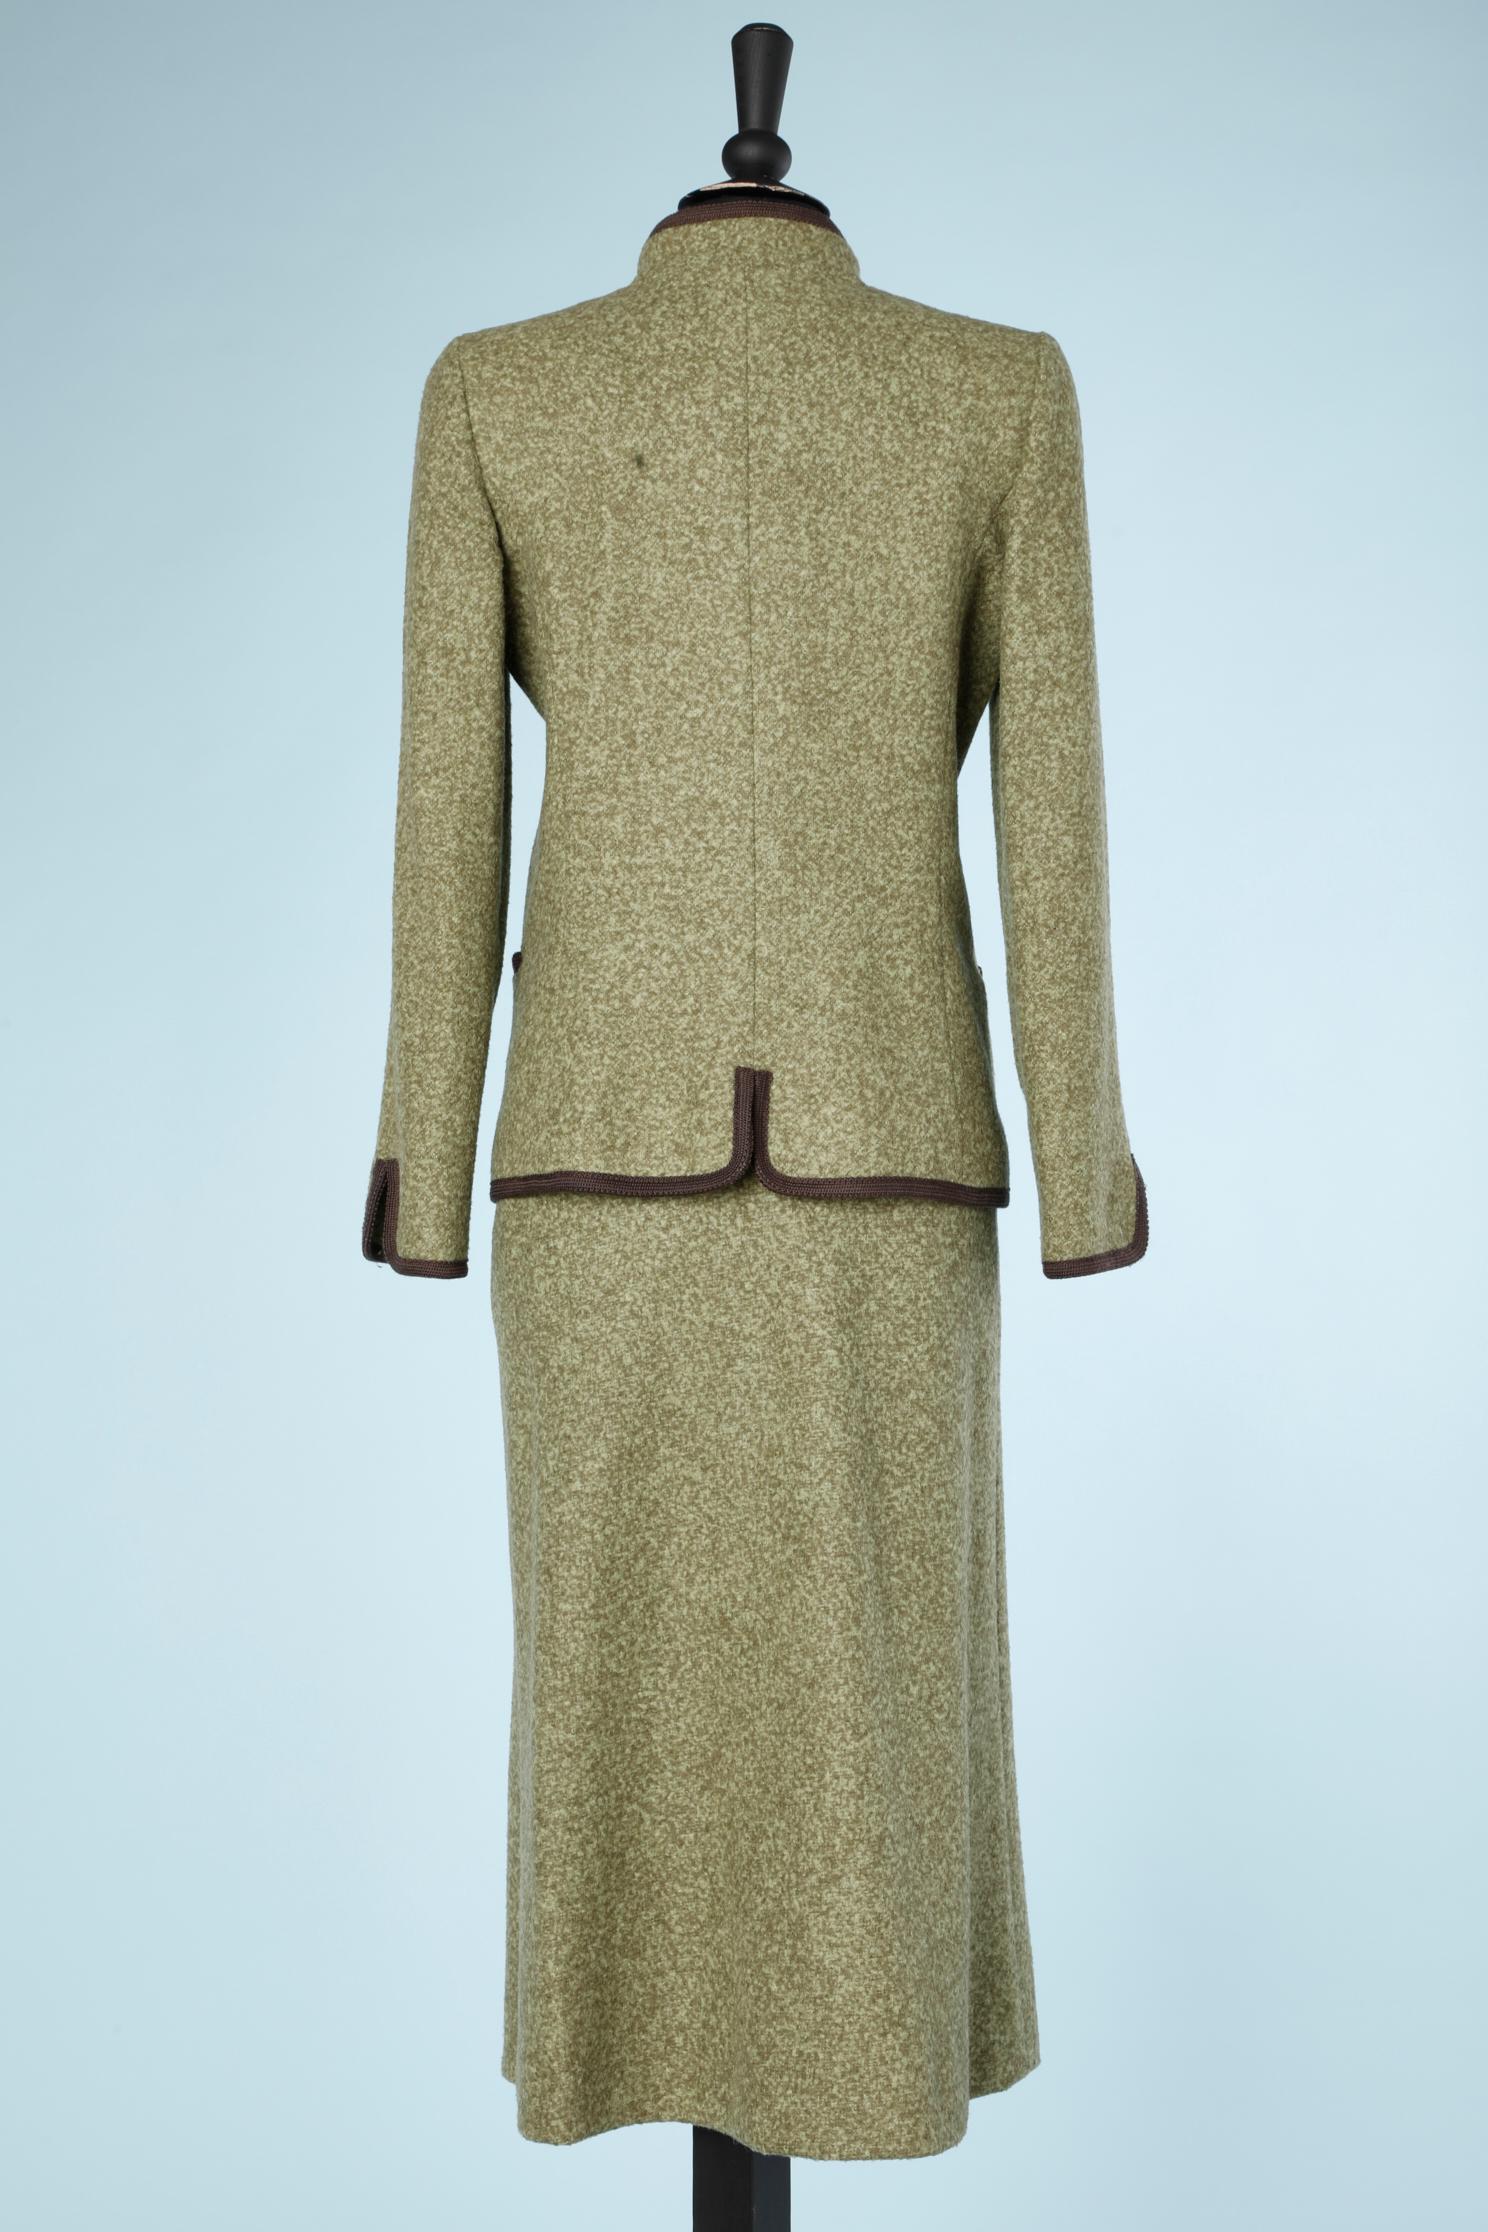 Green wool skirt-suit with brown braids piping Ivoire de Balmain Circa 1980's  For Sale 2